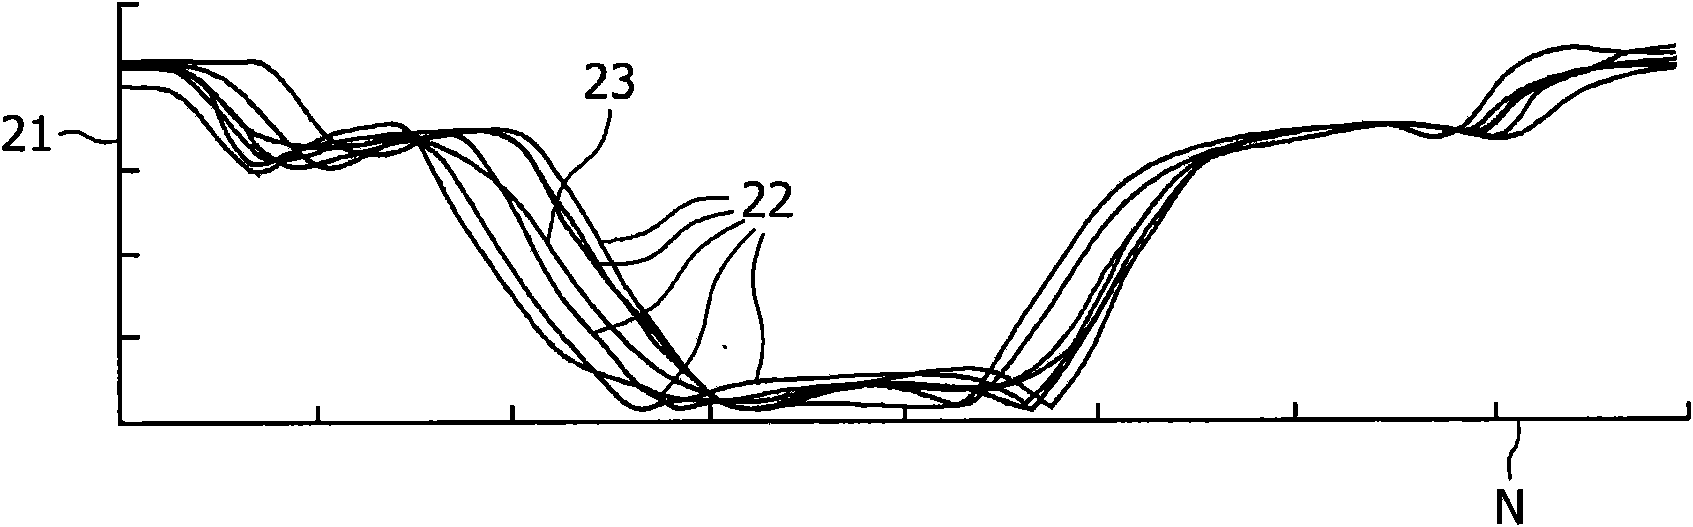 System and method of assessing a movement pattern